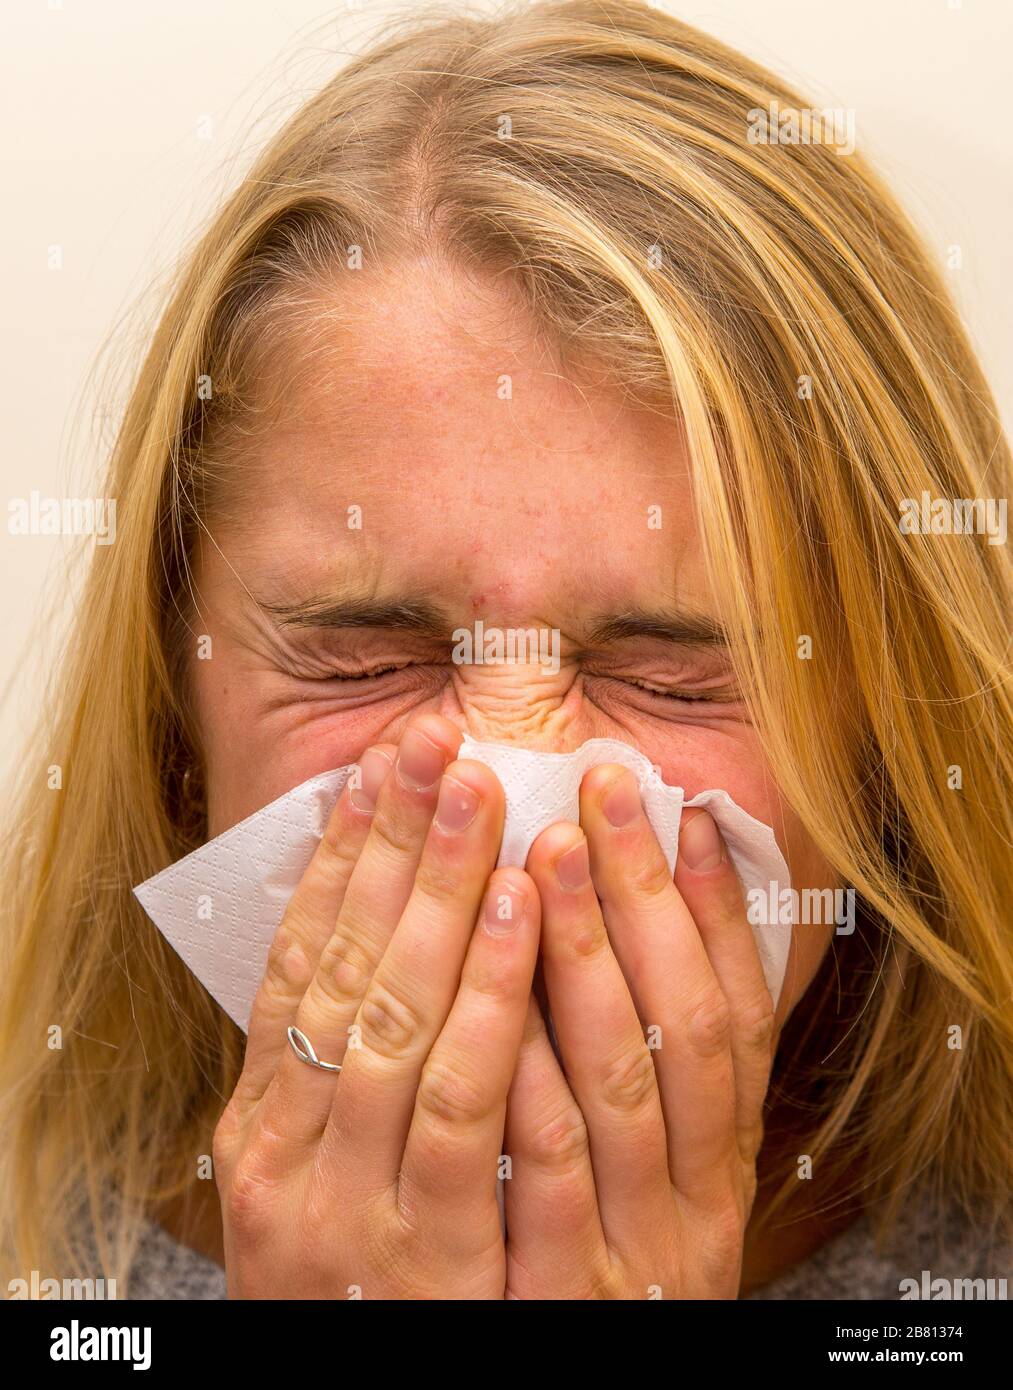 young woman sneezing her nose in a handkerchief Stock Photo